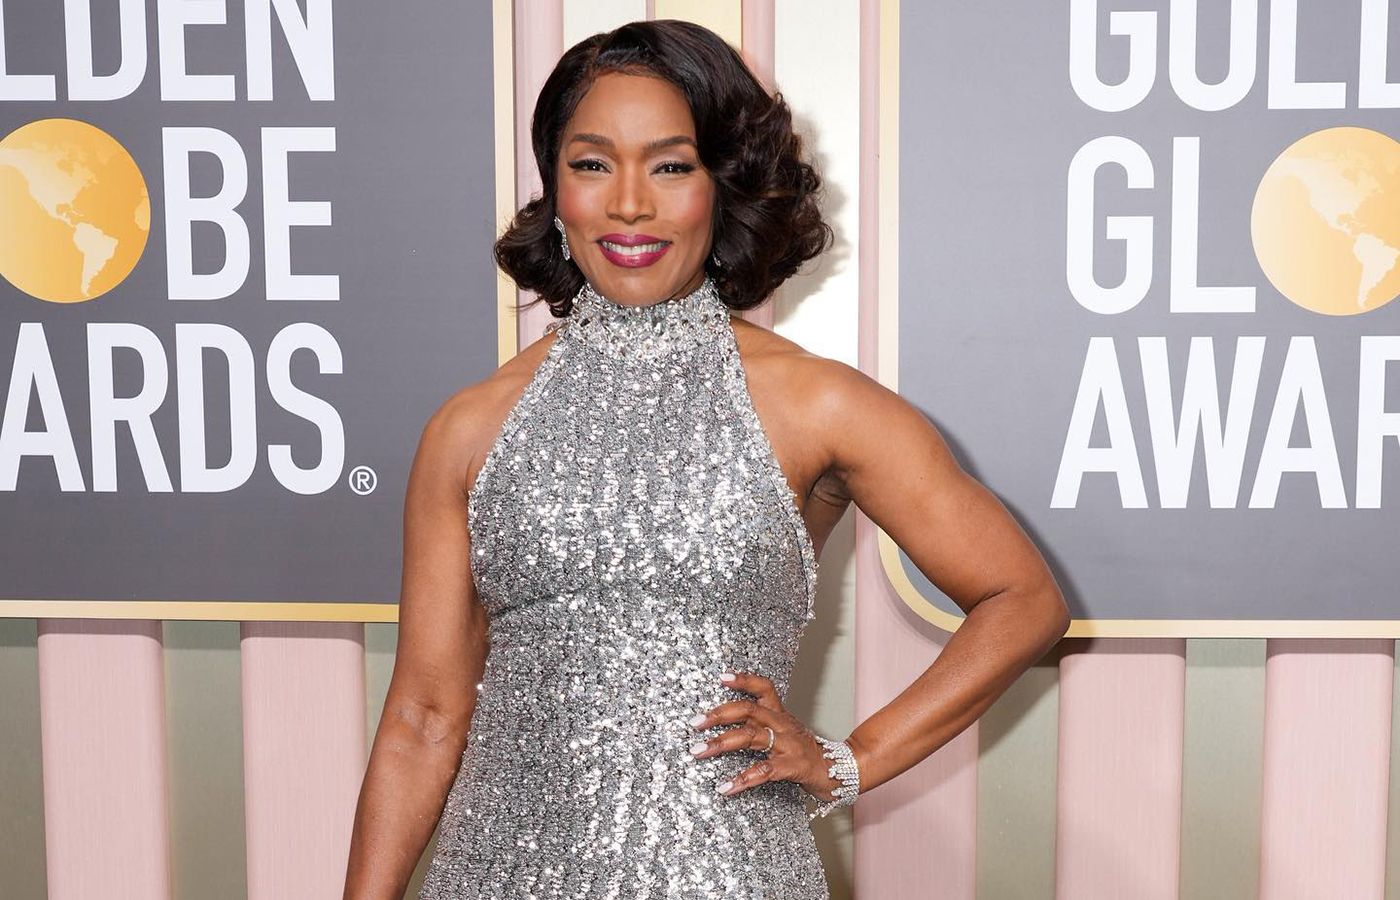 Angela Bassett in Chopard white gold and diamond earrings from the Precious Lace High Jewellery collection and a Fairmined-certified white gold and diamond bracelet from the Green Carpet High Jewellery collection